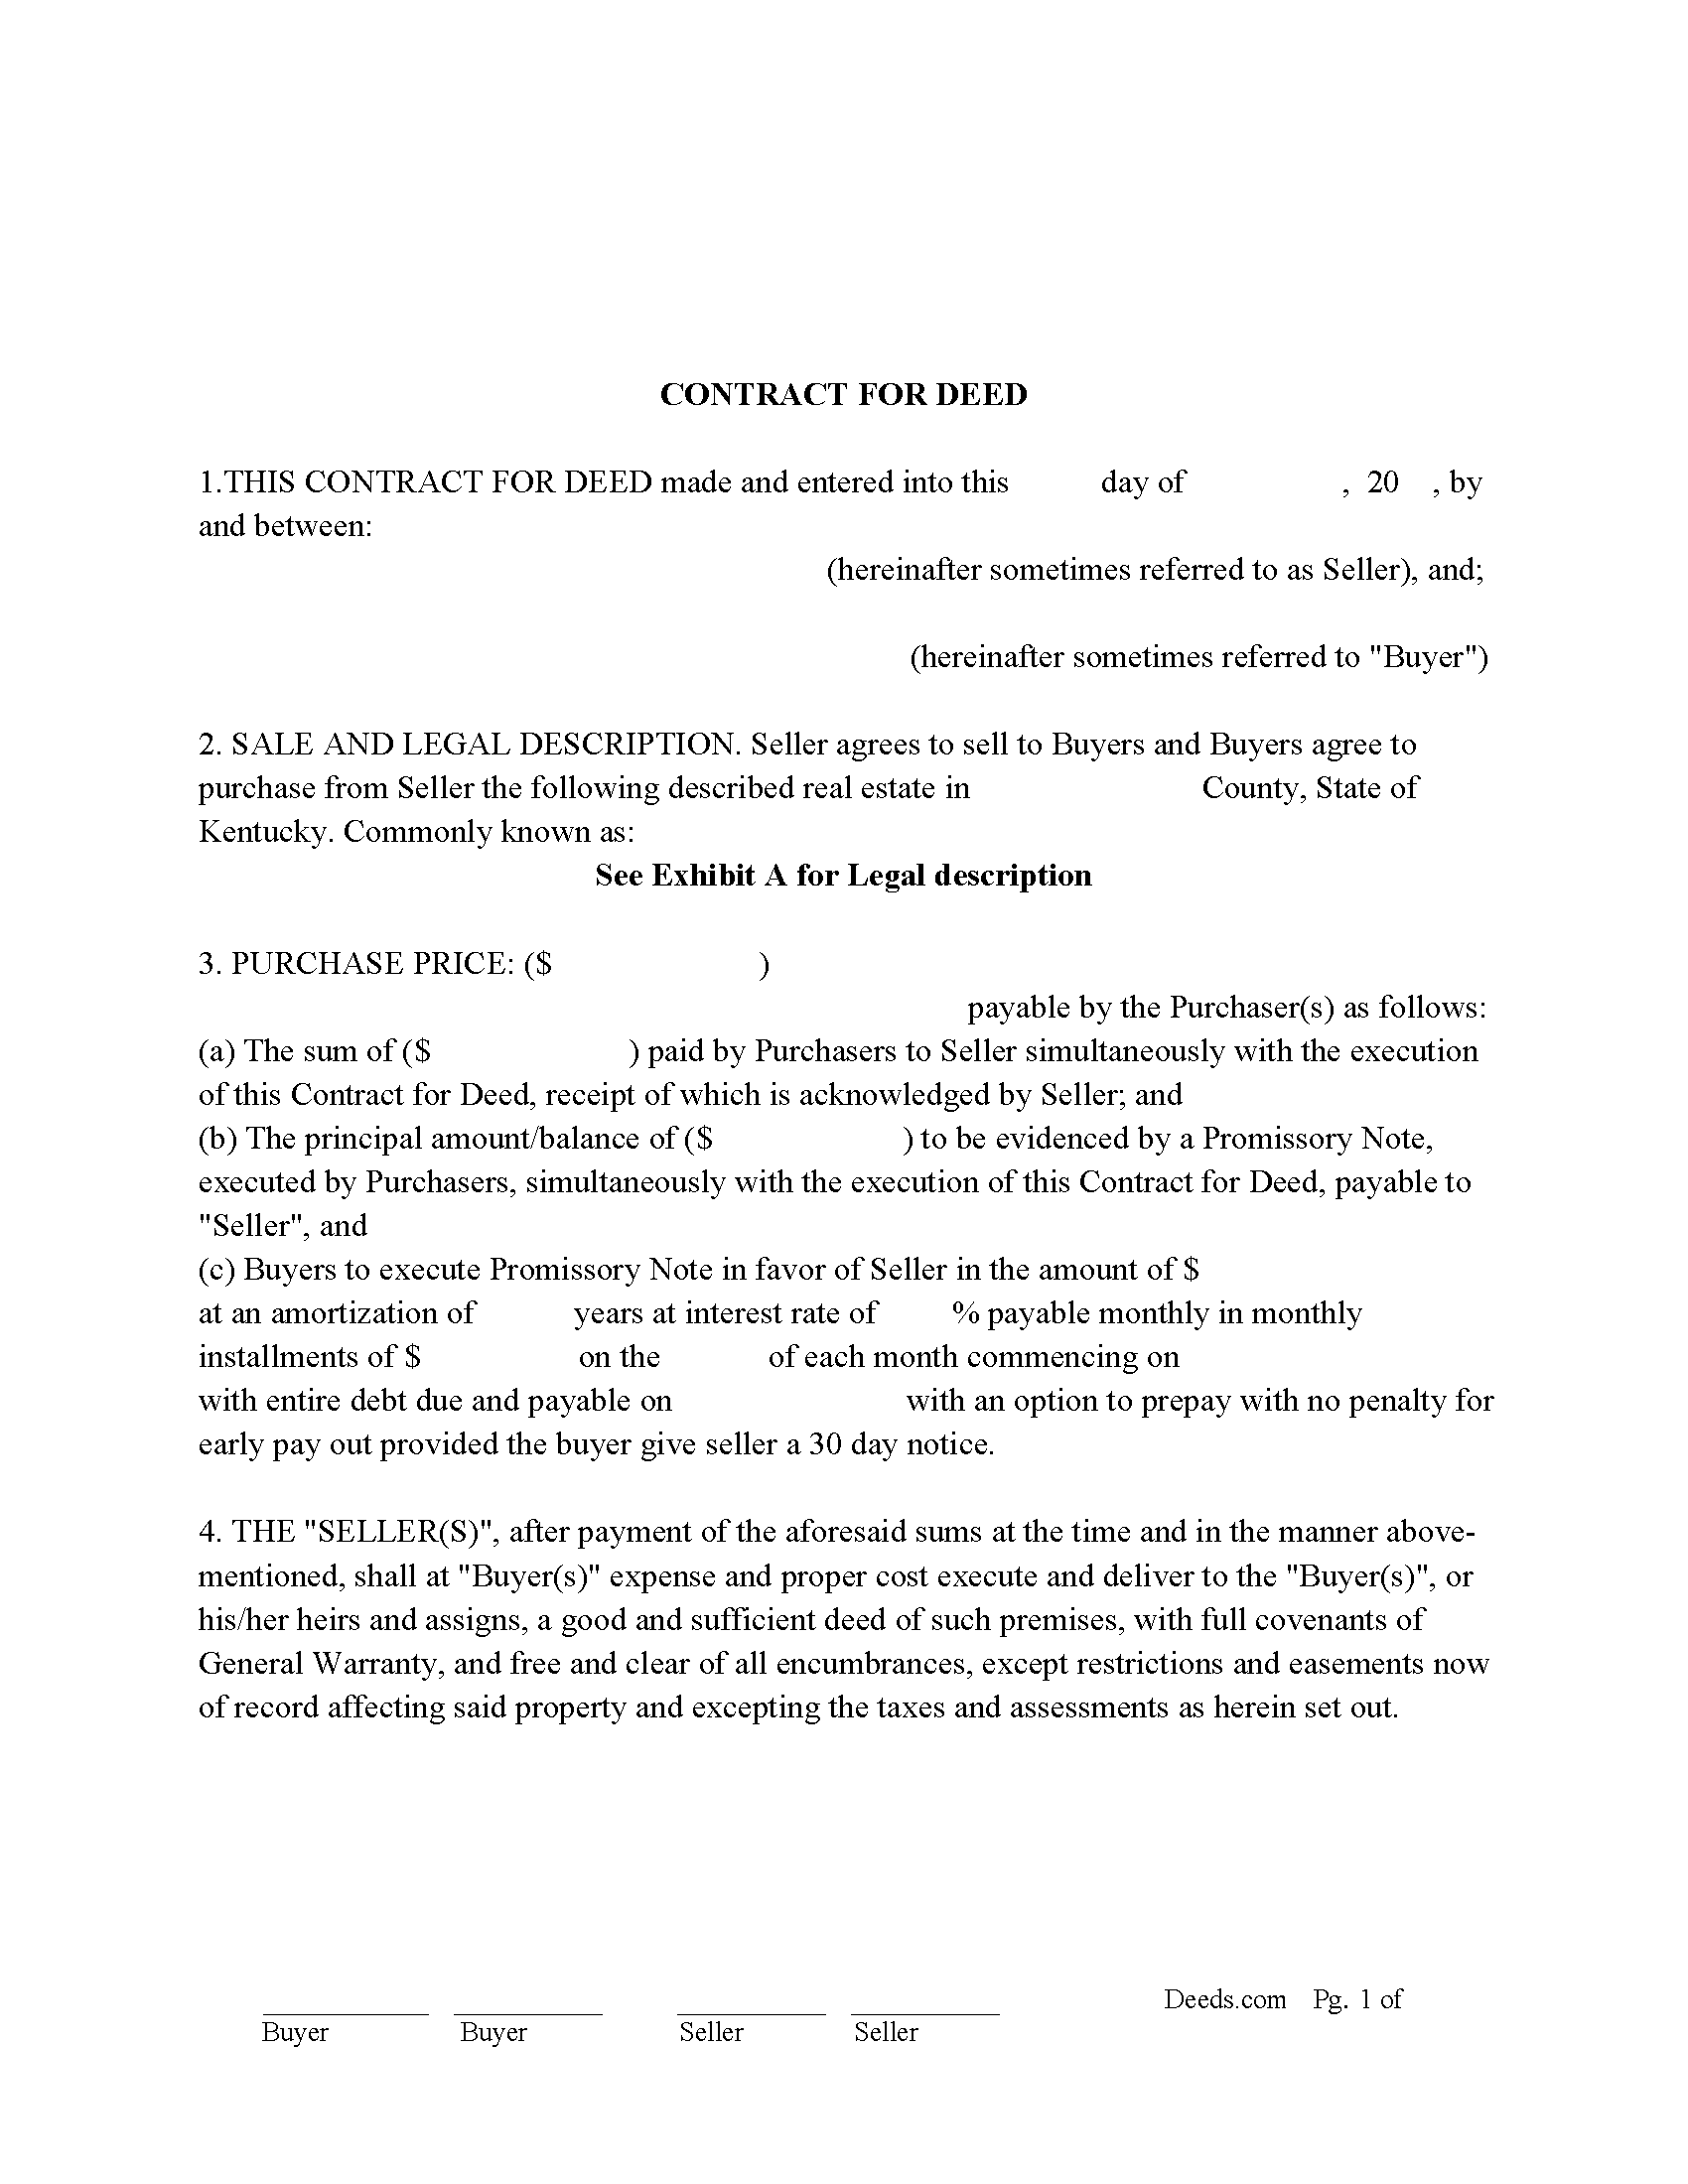 Contract for Deed and Promissory Note